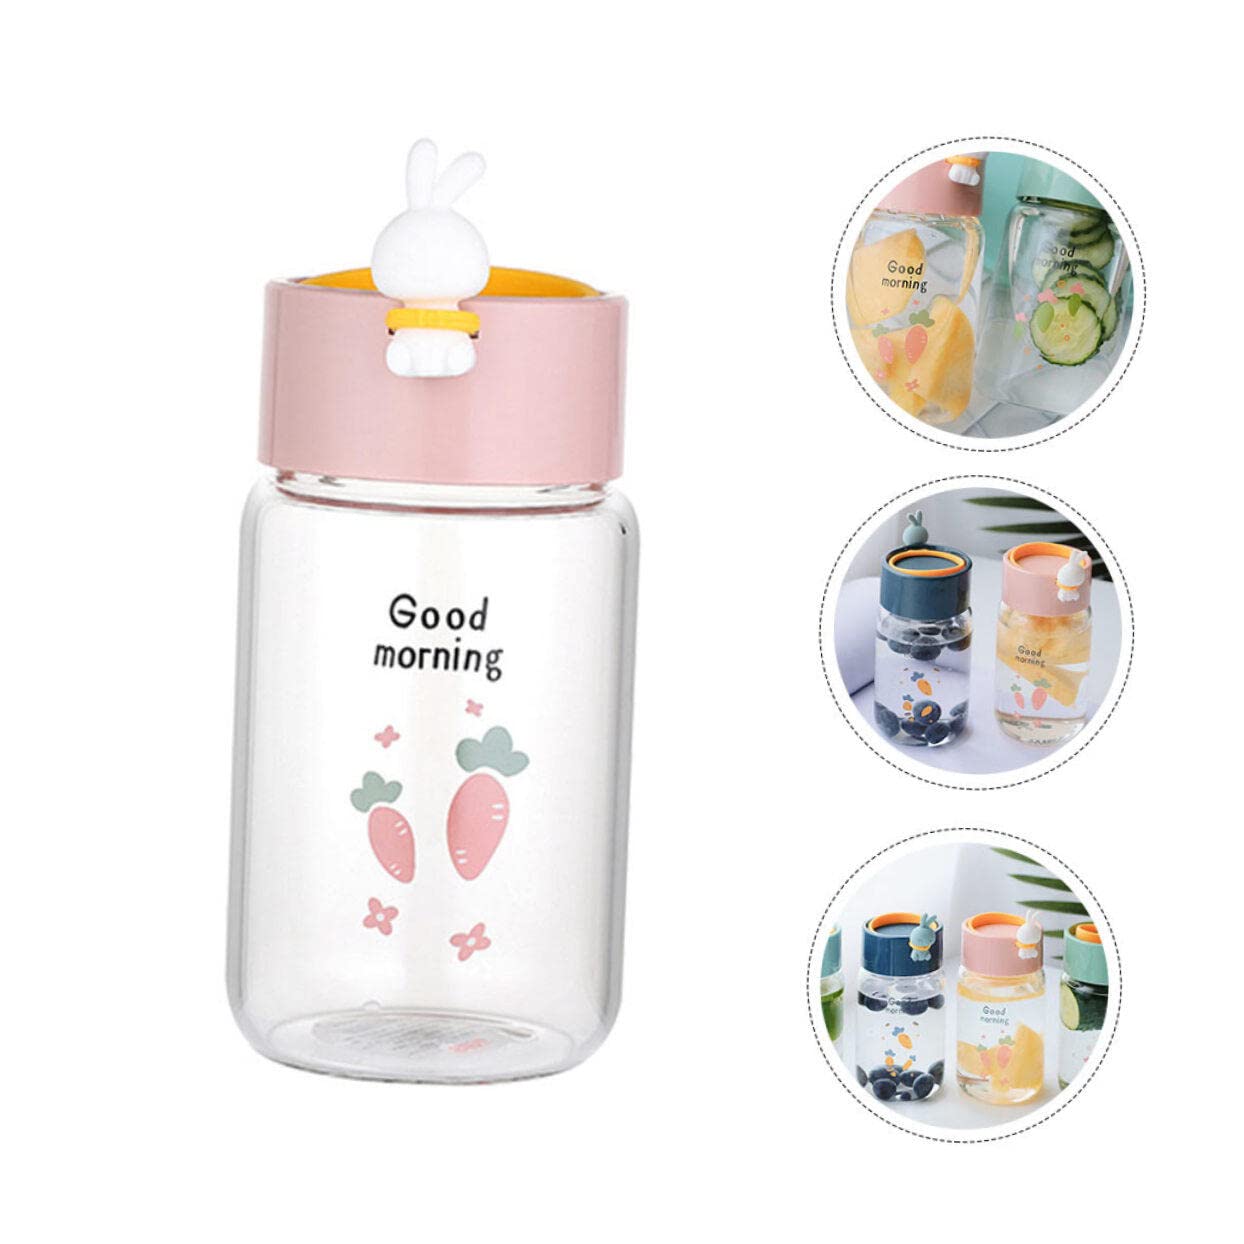 LIFKOME Glass Drinking Bottle 1pc Rabbit Glass Water Cup Cup with Lid Drinking Glasses with Lids Cartoon Water Cup Pudding Jars Water Jars with Lids Cartoon Drinking Cup Fresh